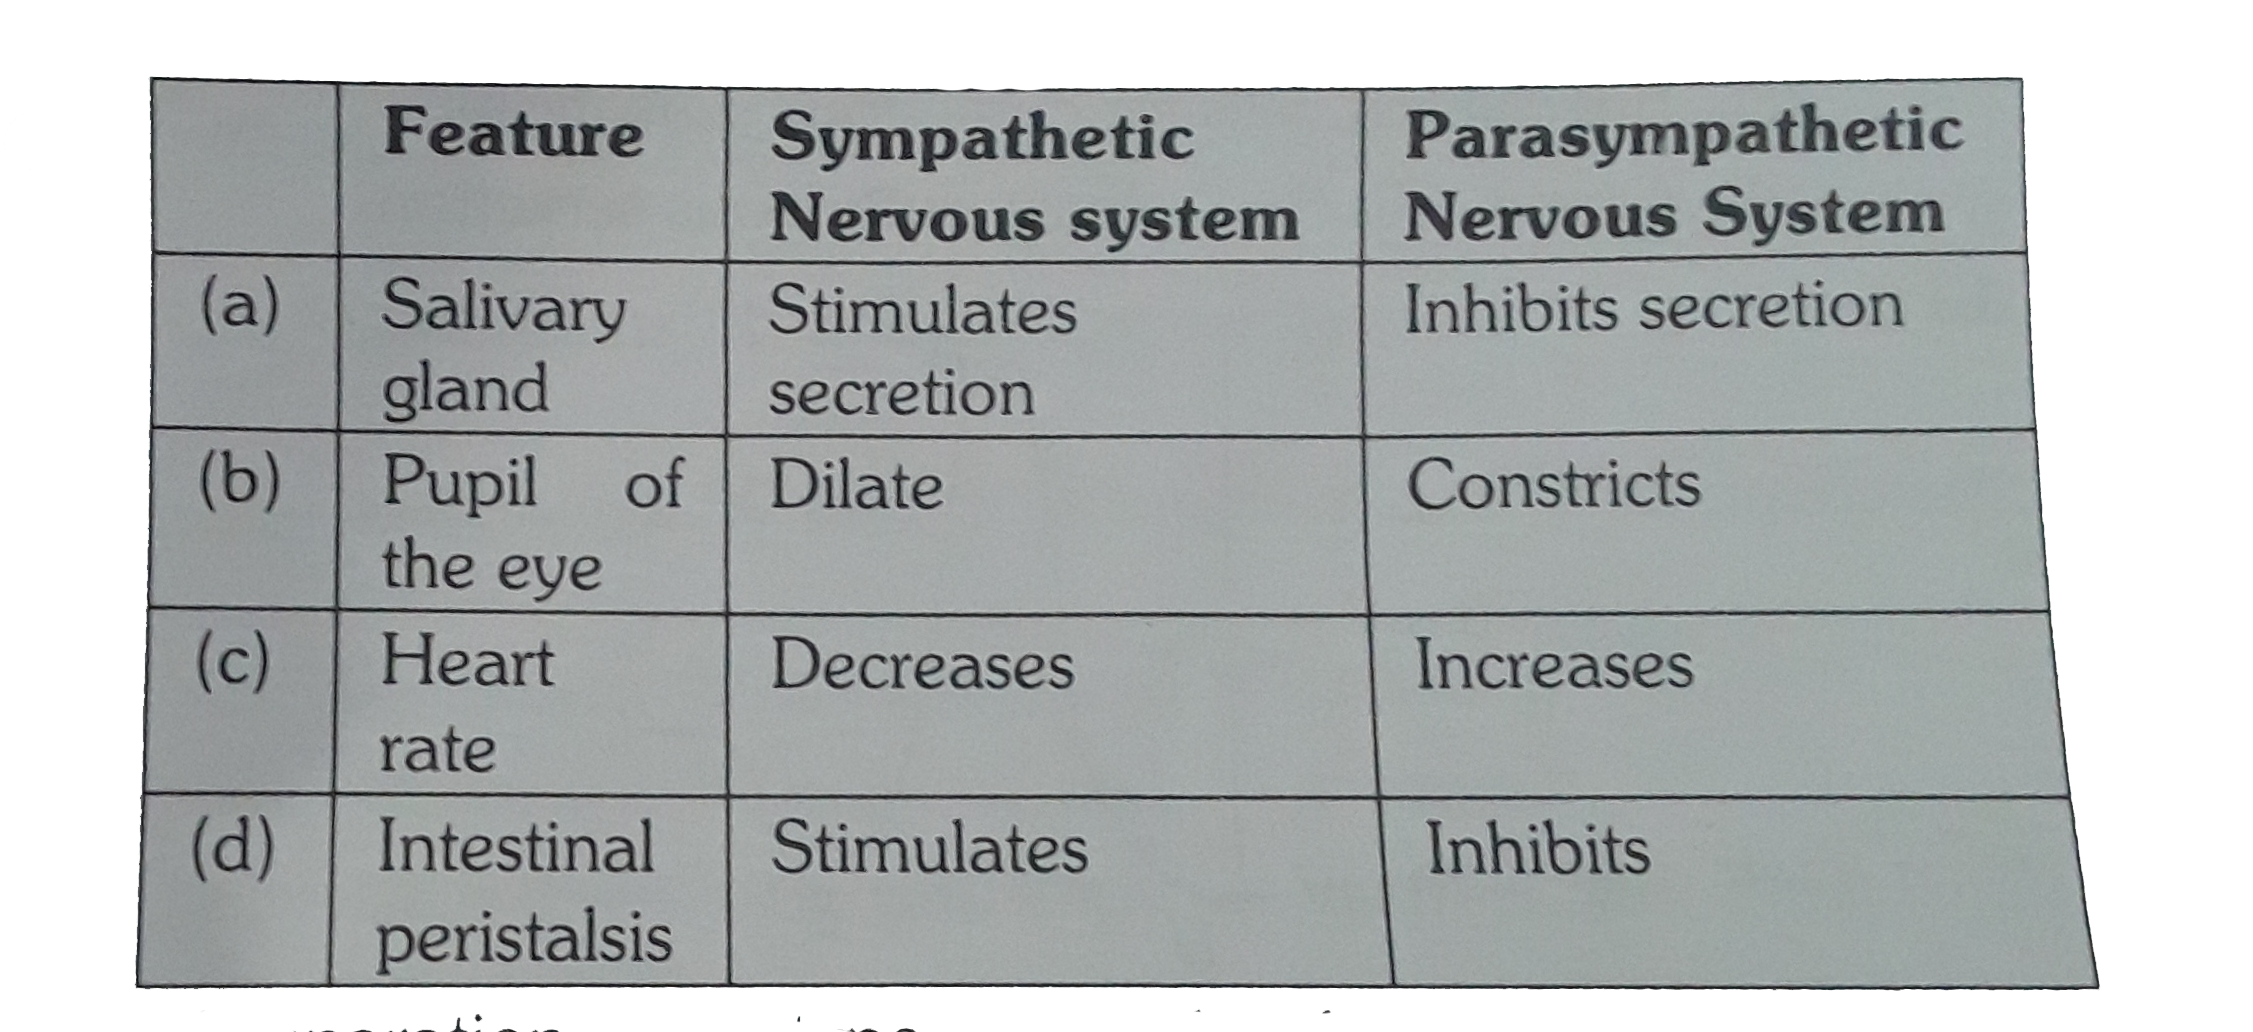 Given below is a table camparing the effect of sympathetic and parasympathetic nervous system for four features (a-d). Which one feature is correctly described